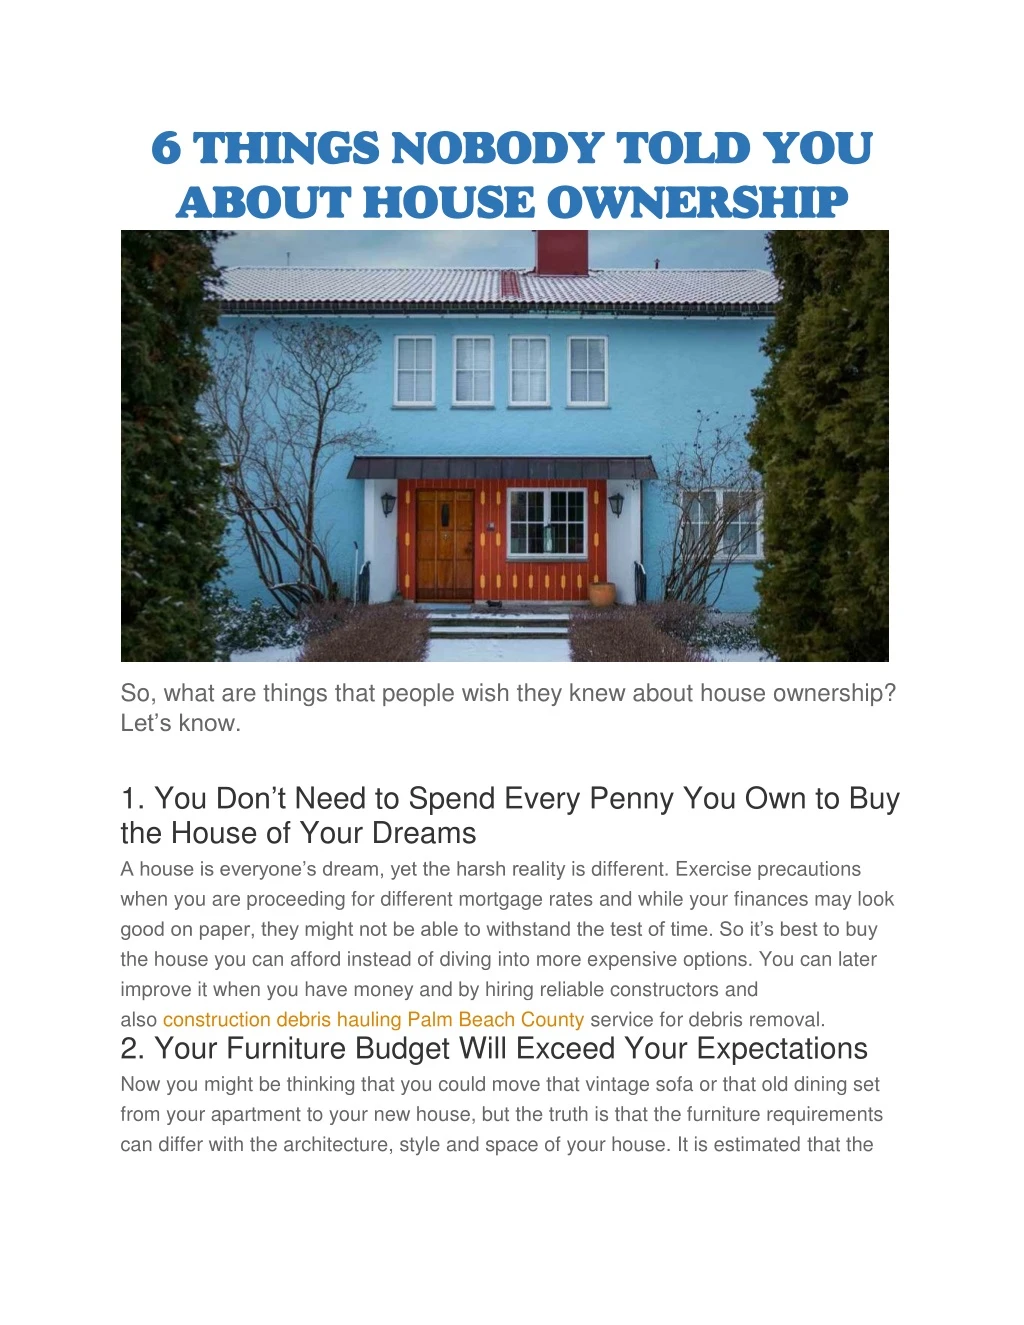 6 things nobody told you about house ownership